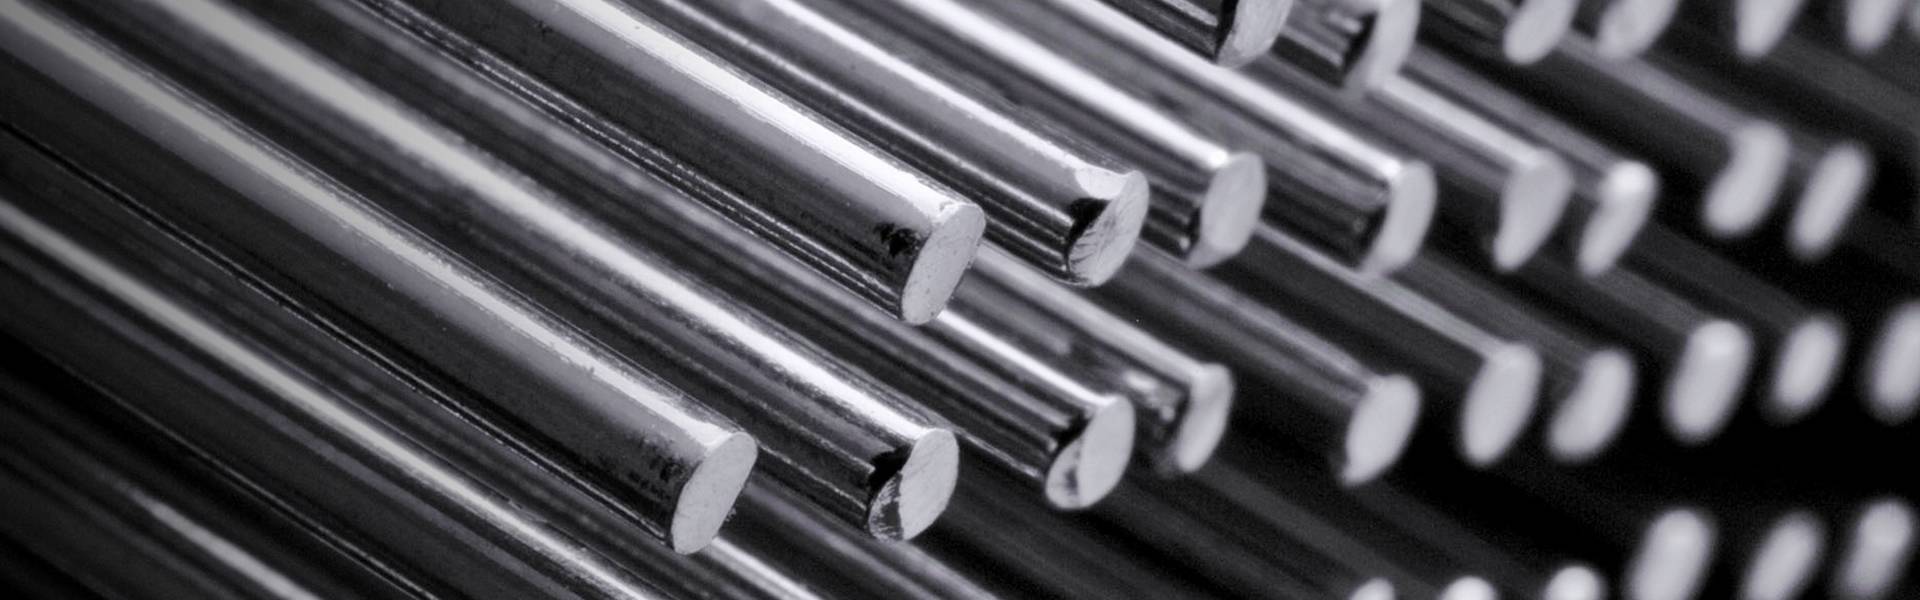 It shows several steel bars with the same diameters.